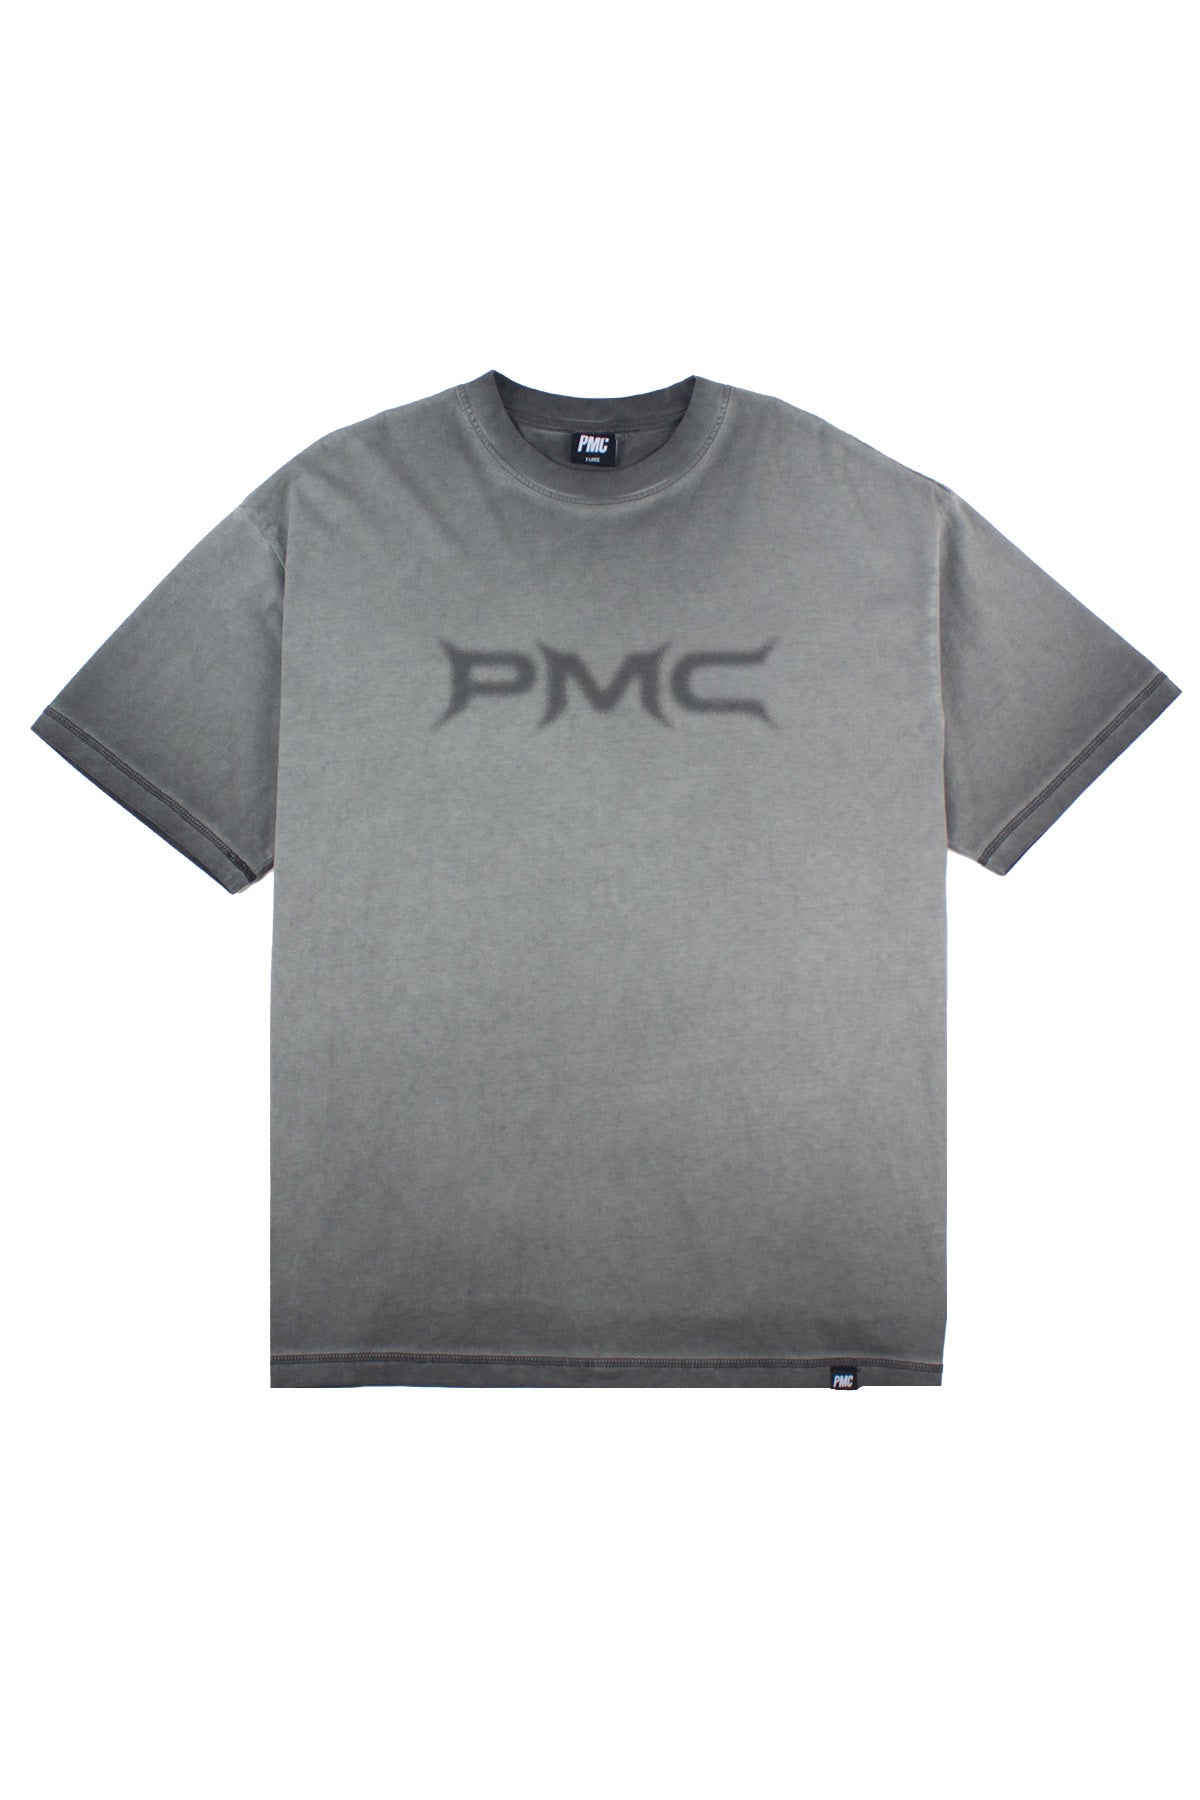 Blurred Liquify Logo Reverse Dyed Tee Charcoal